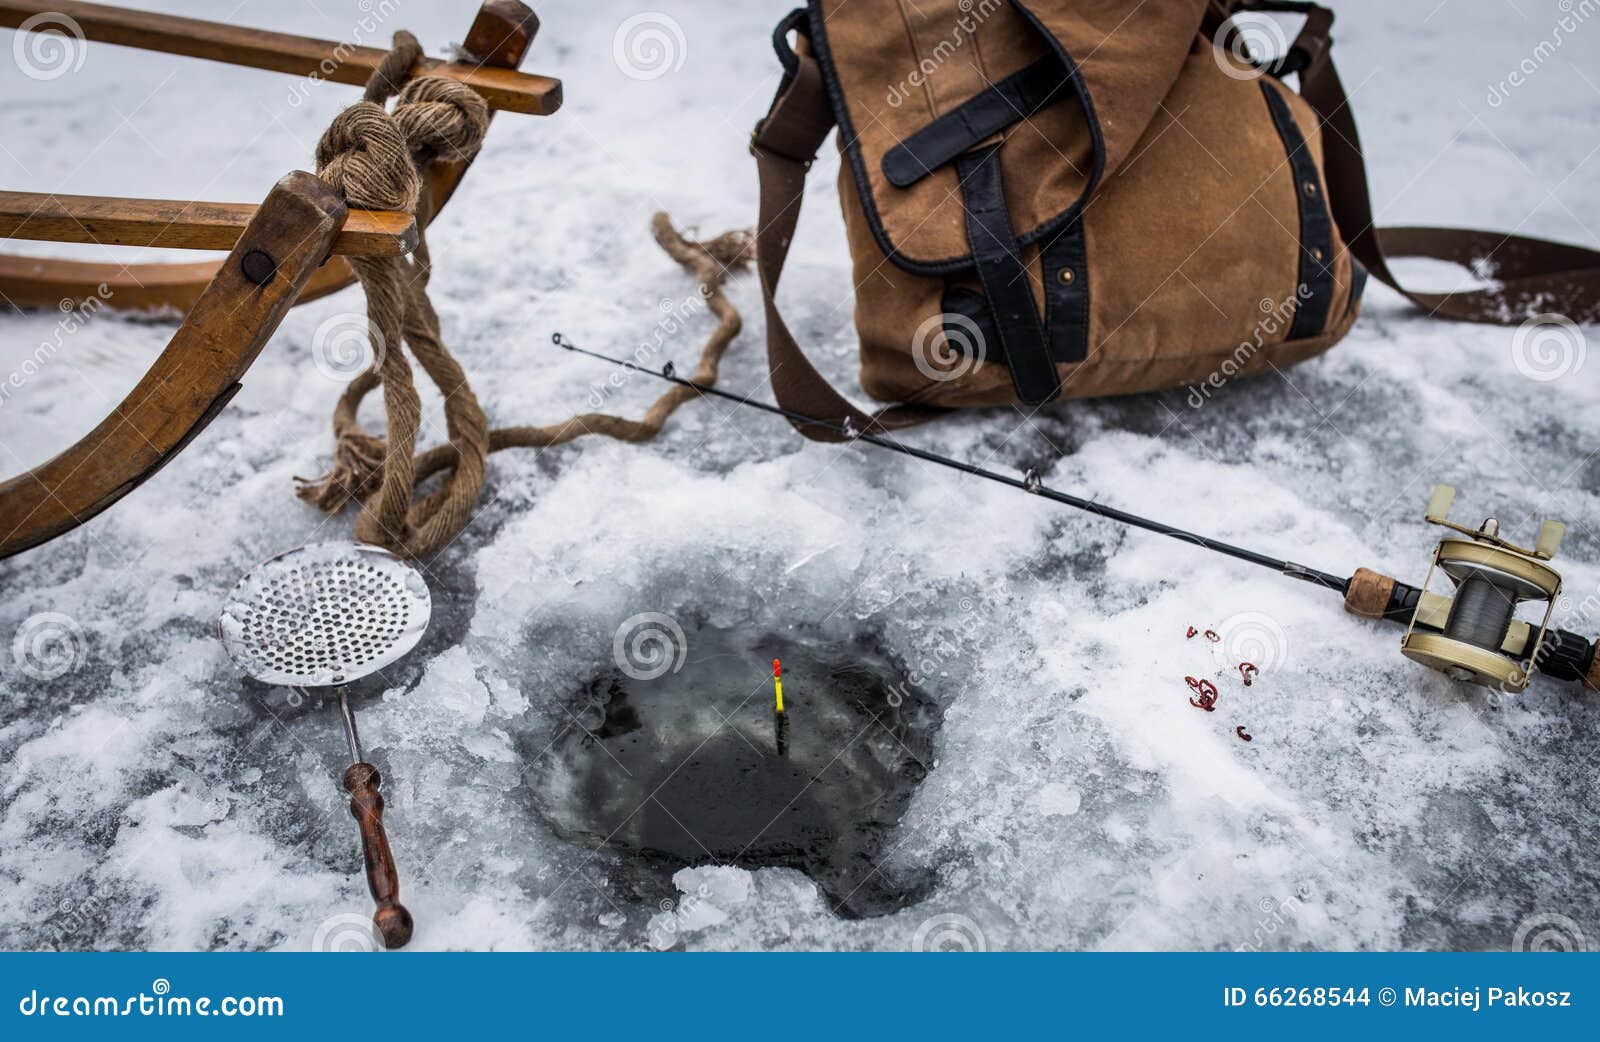 https://thumbs.dreamstime.com/z/vintage-ice-fishing-cold-morning-66268544.jpg